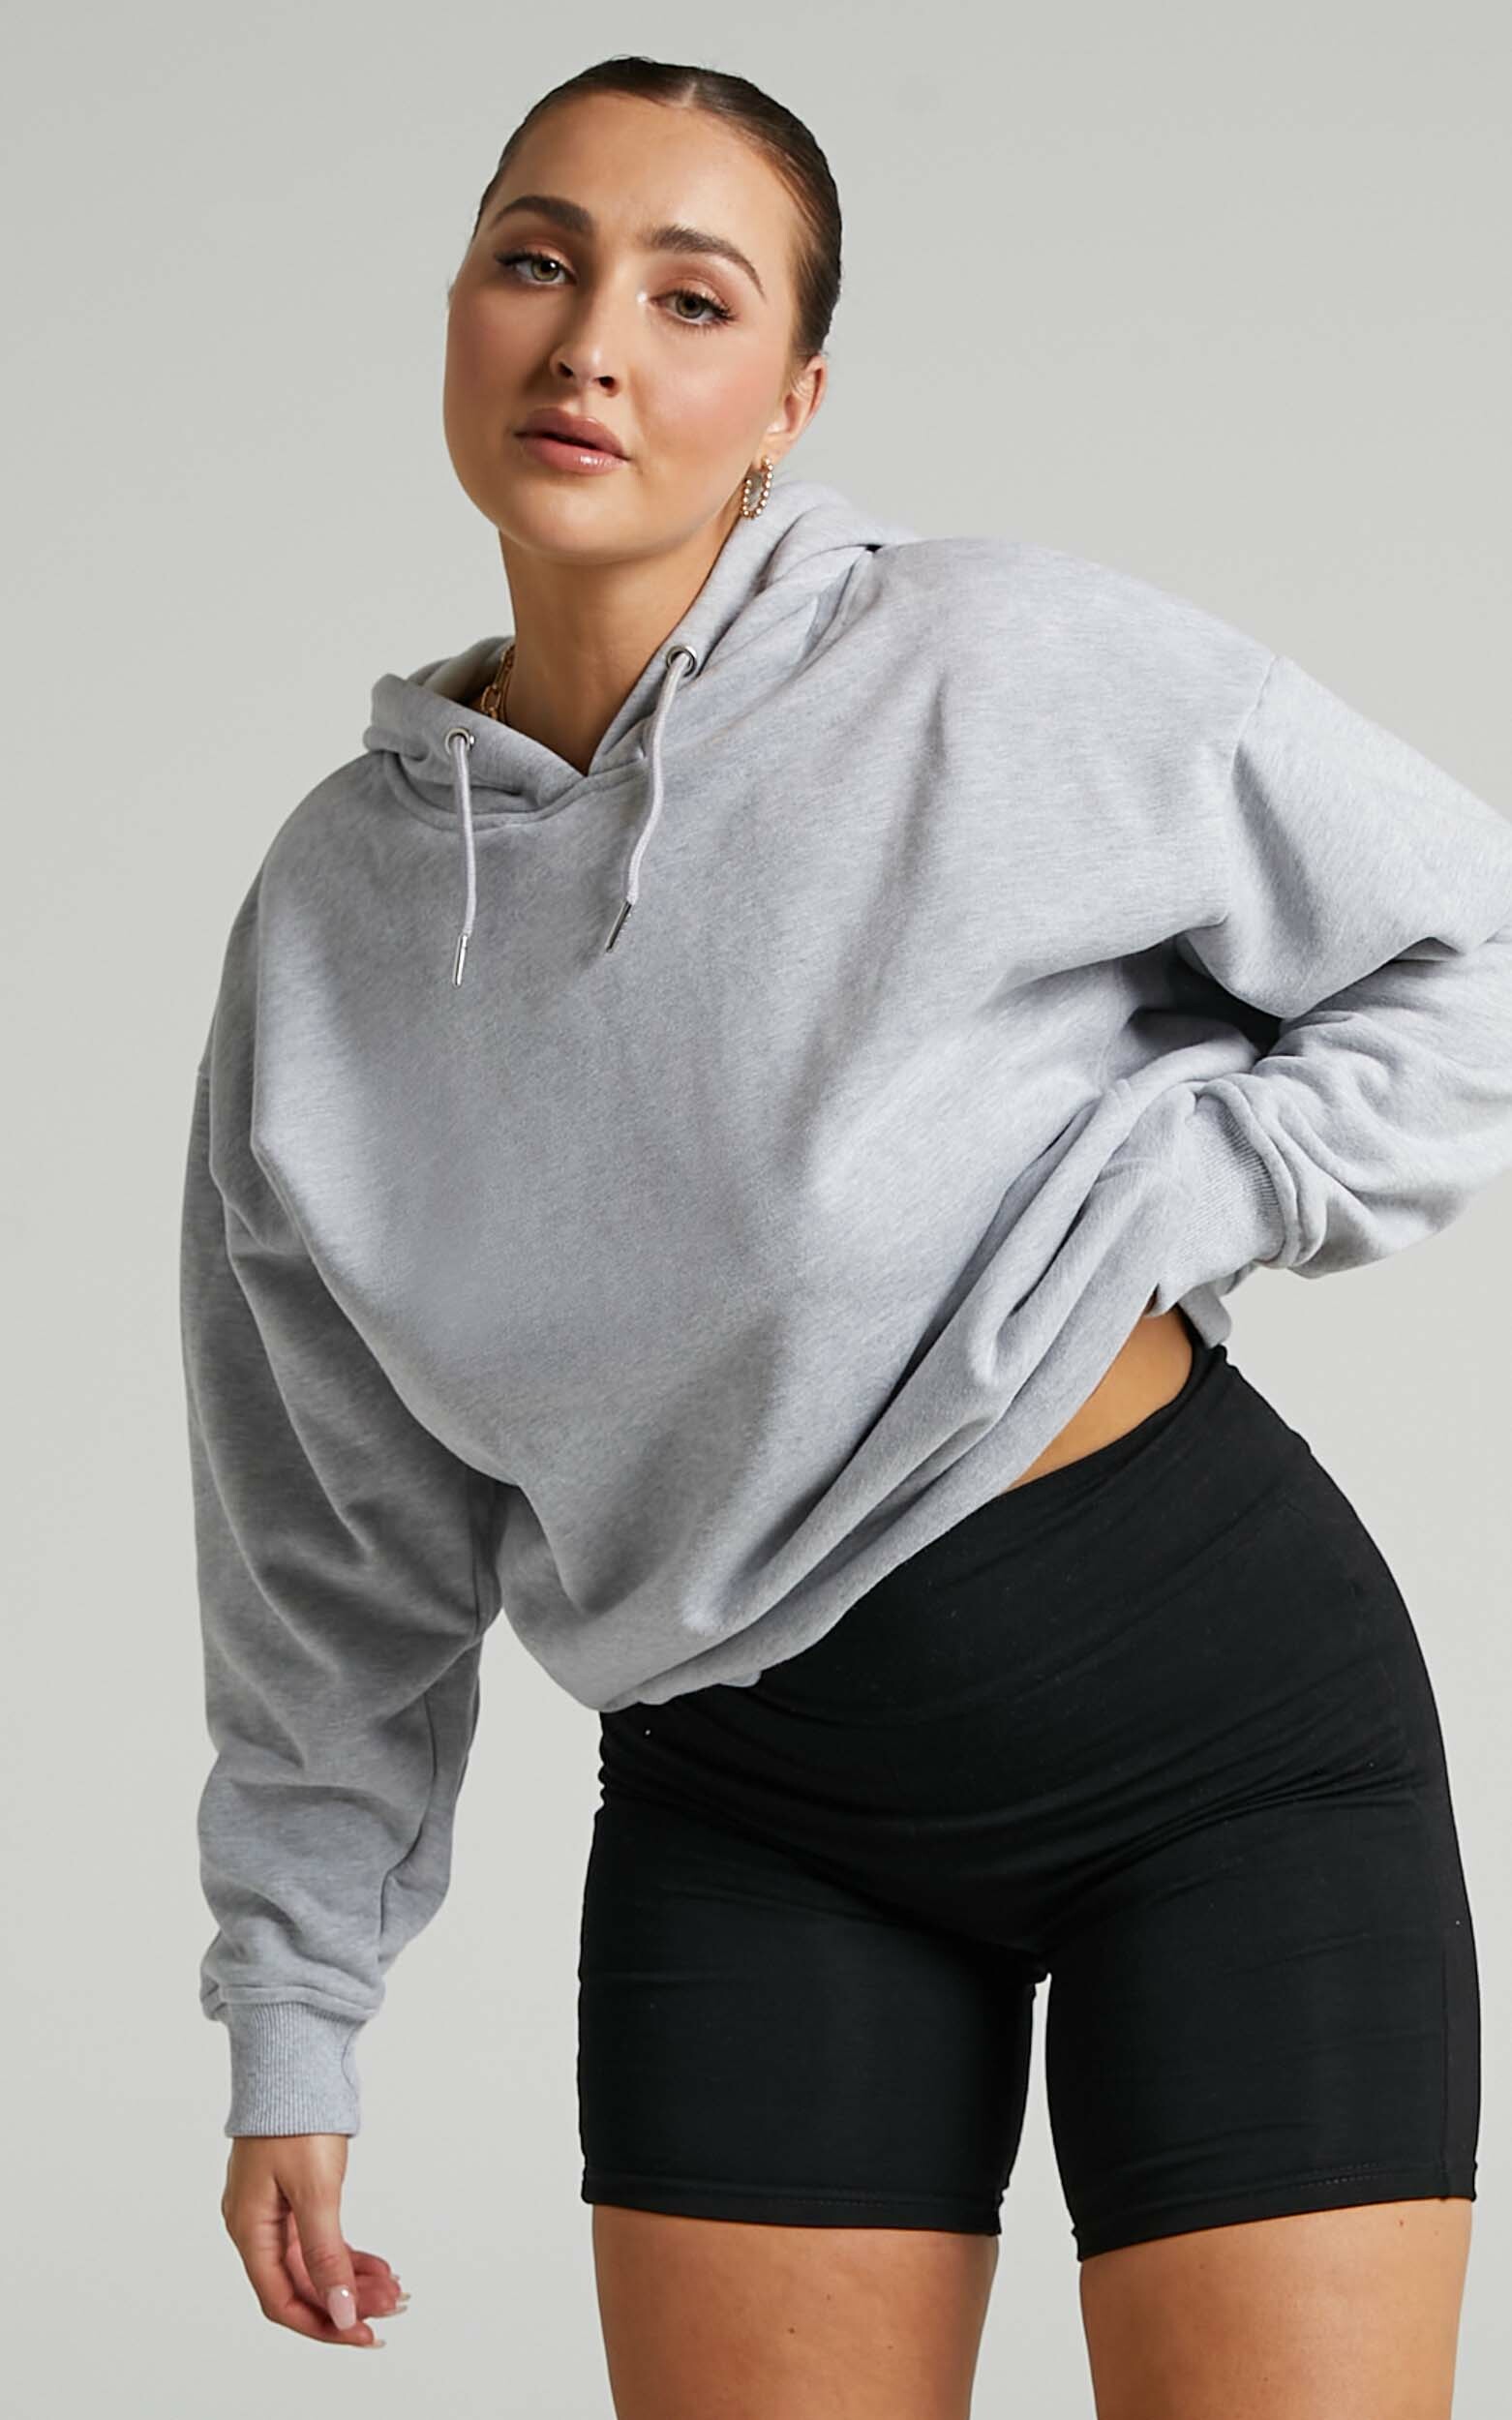 Sunday Society Club - Ana Hoodie in Grey Marle - 06, GRY1, hi-res image number null